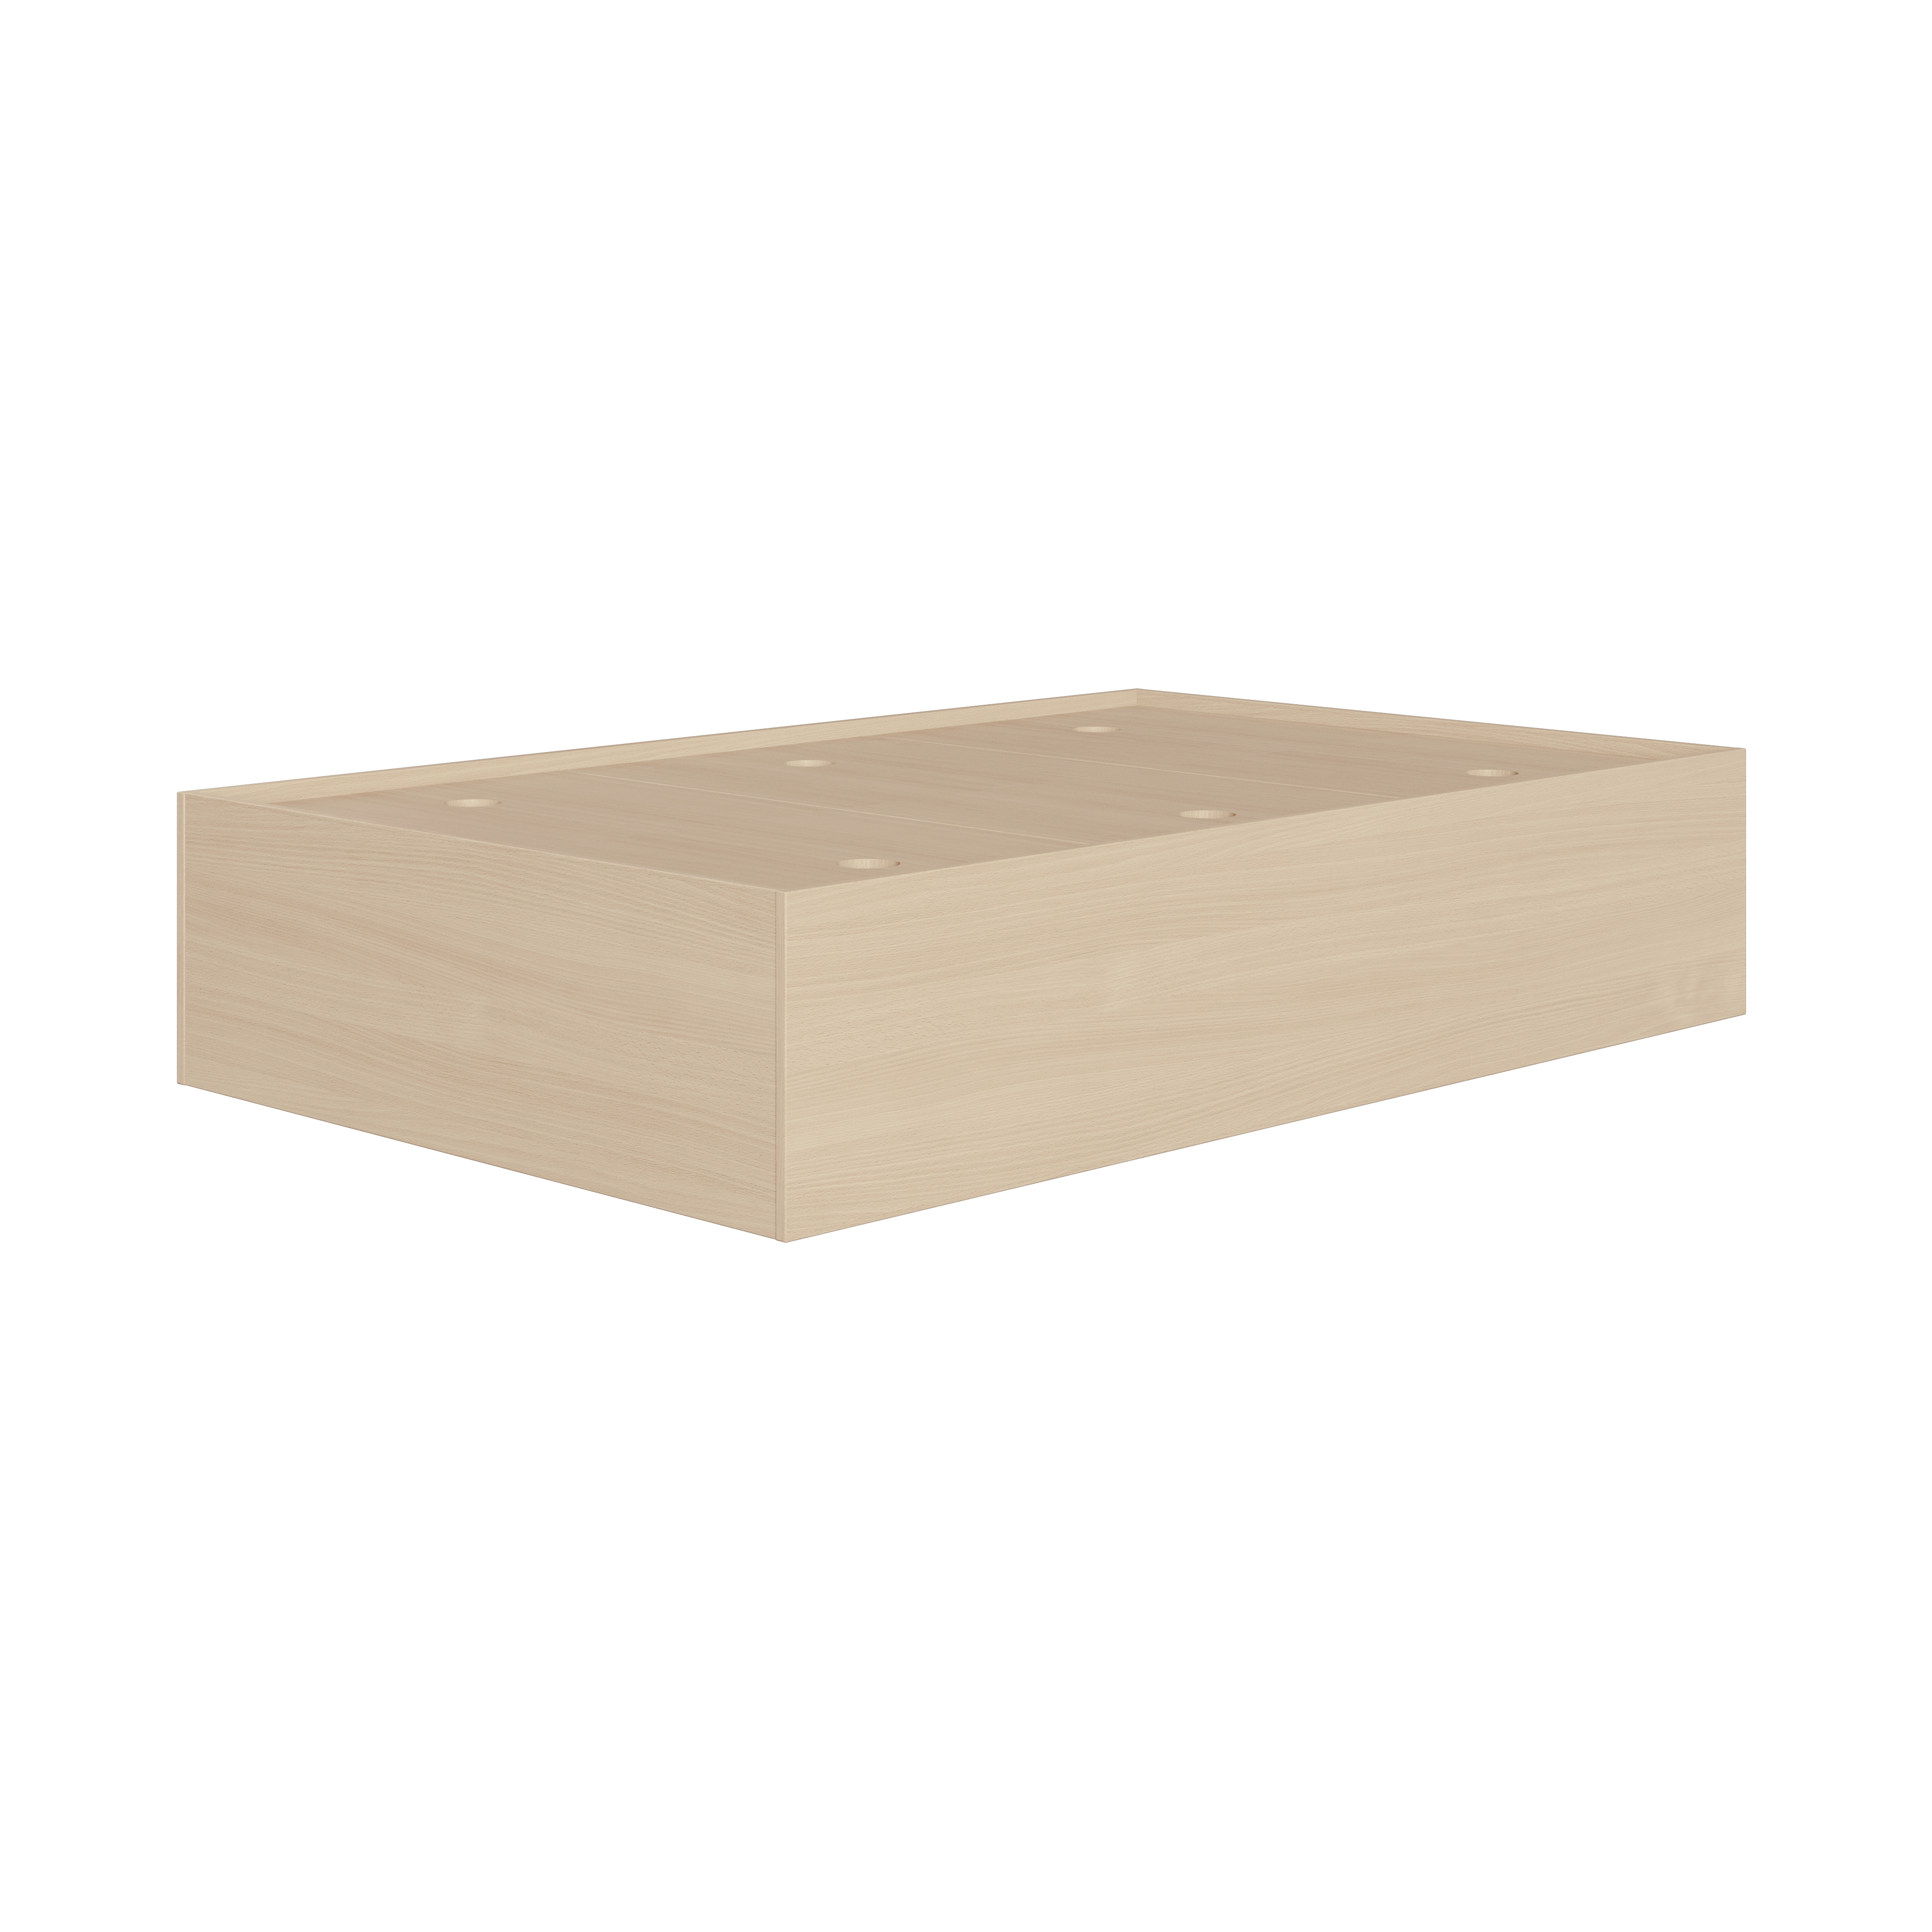 Box Bed - Wooden - Small Double (Flat packed)